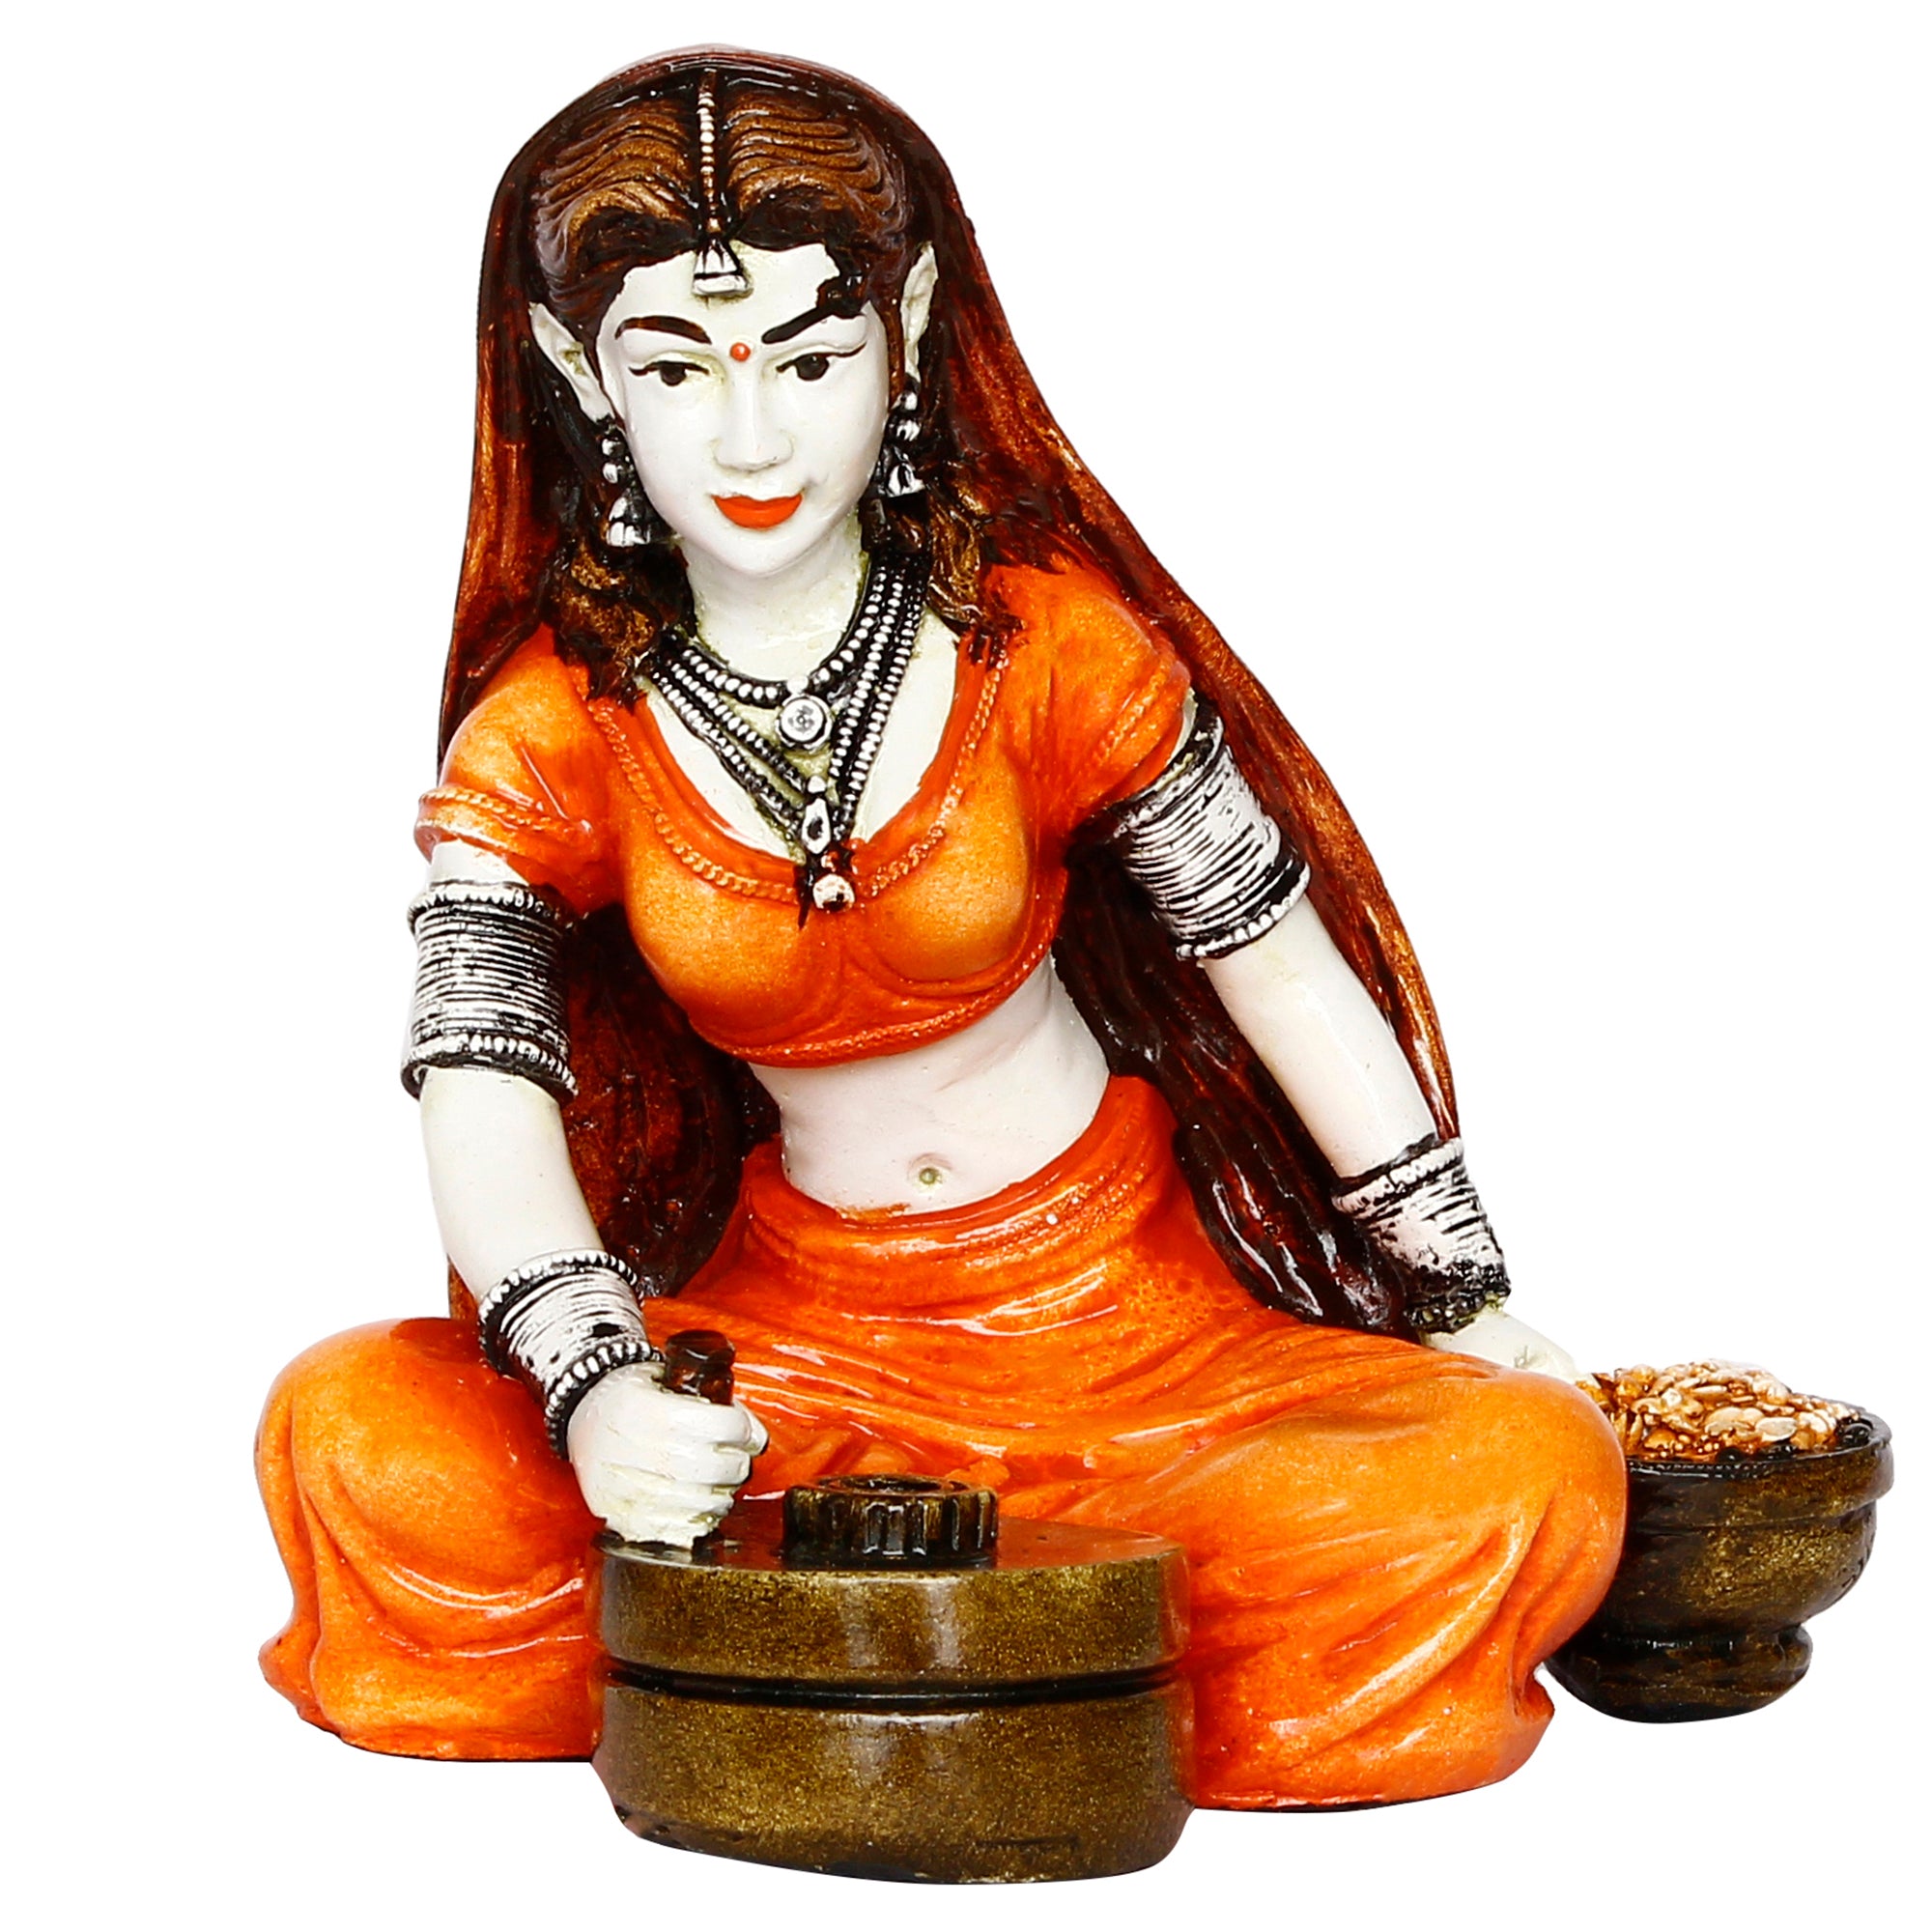 Polyresin Rajasthani Women Statue Using Traditional Flour Mill Handcrafted Human Figurine Decorative Showpiece 2